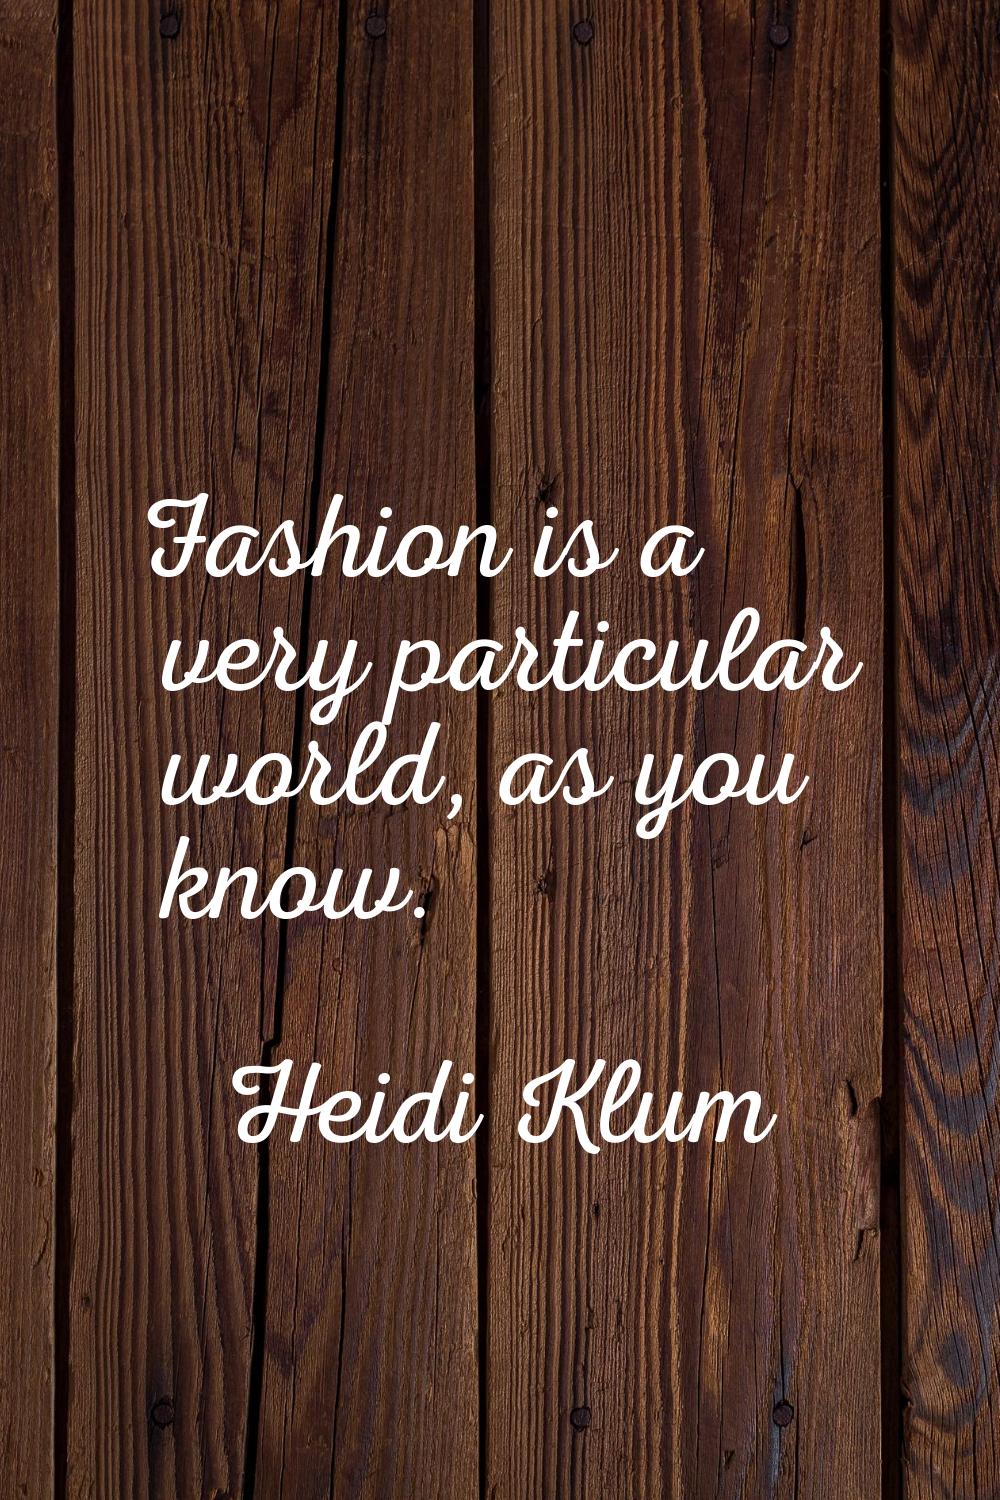 Fashion is a very particular world, as you know.